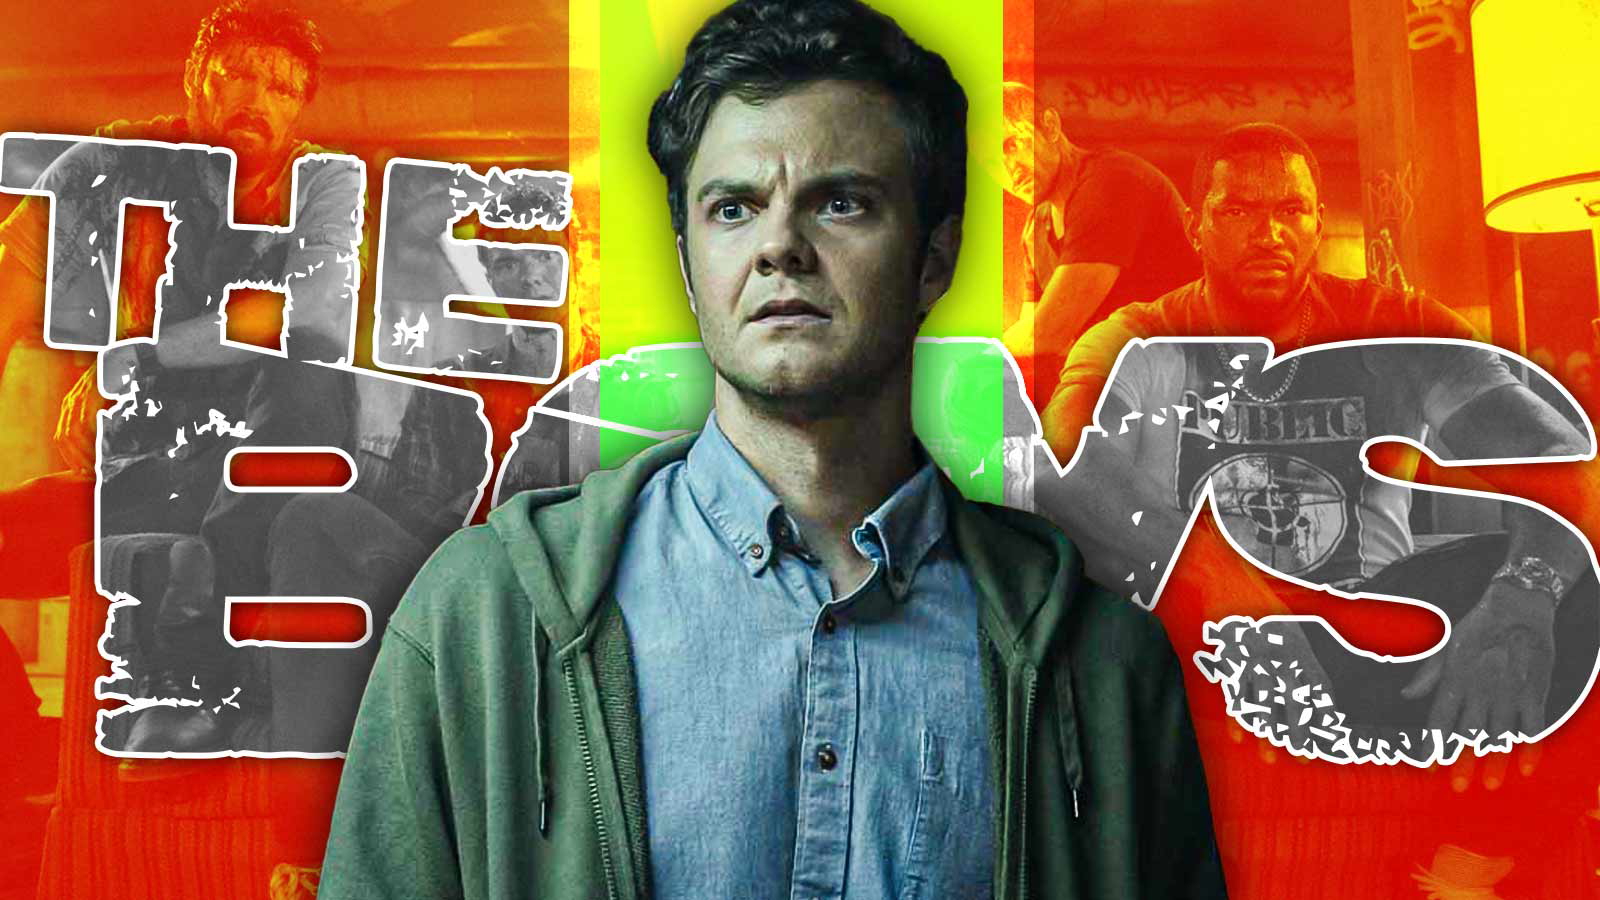 “It doesn’t even come remotely close”: ’The Boys’ Makes an Unforgivable Error With Jack Quaid’s Arc That Gets Played for Laughs